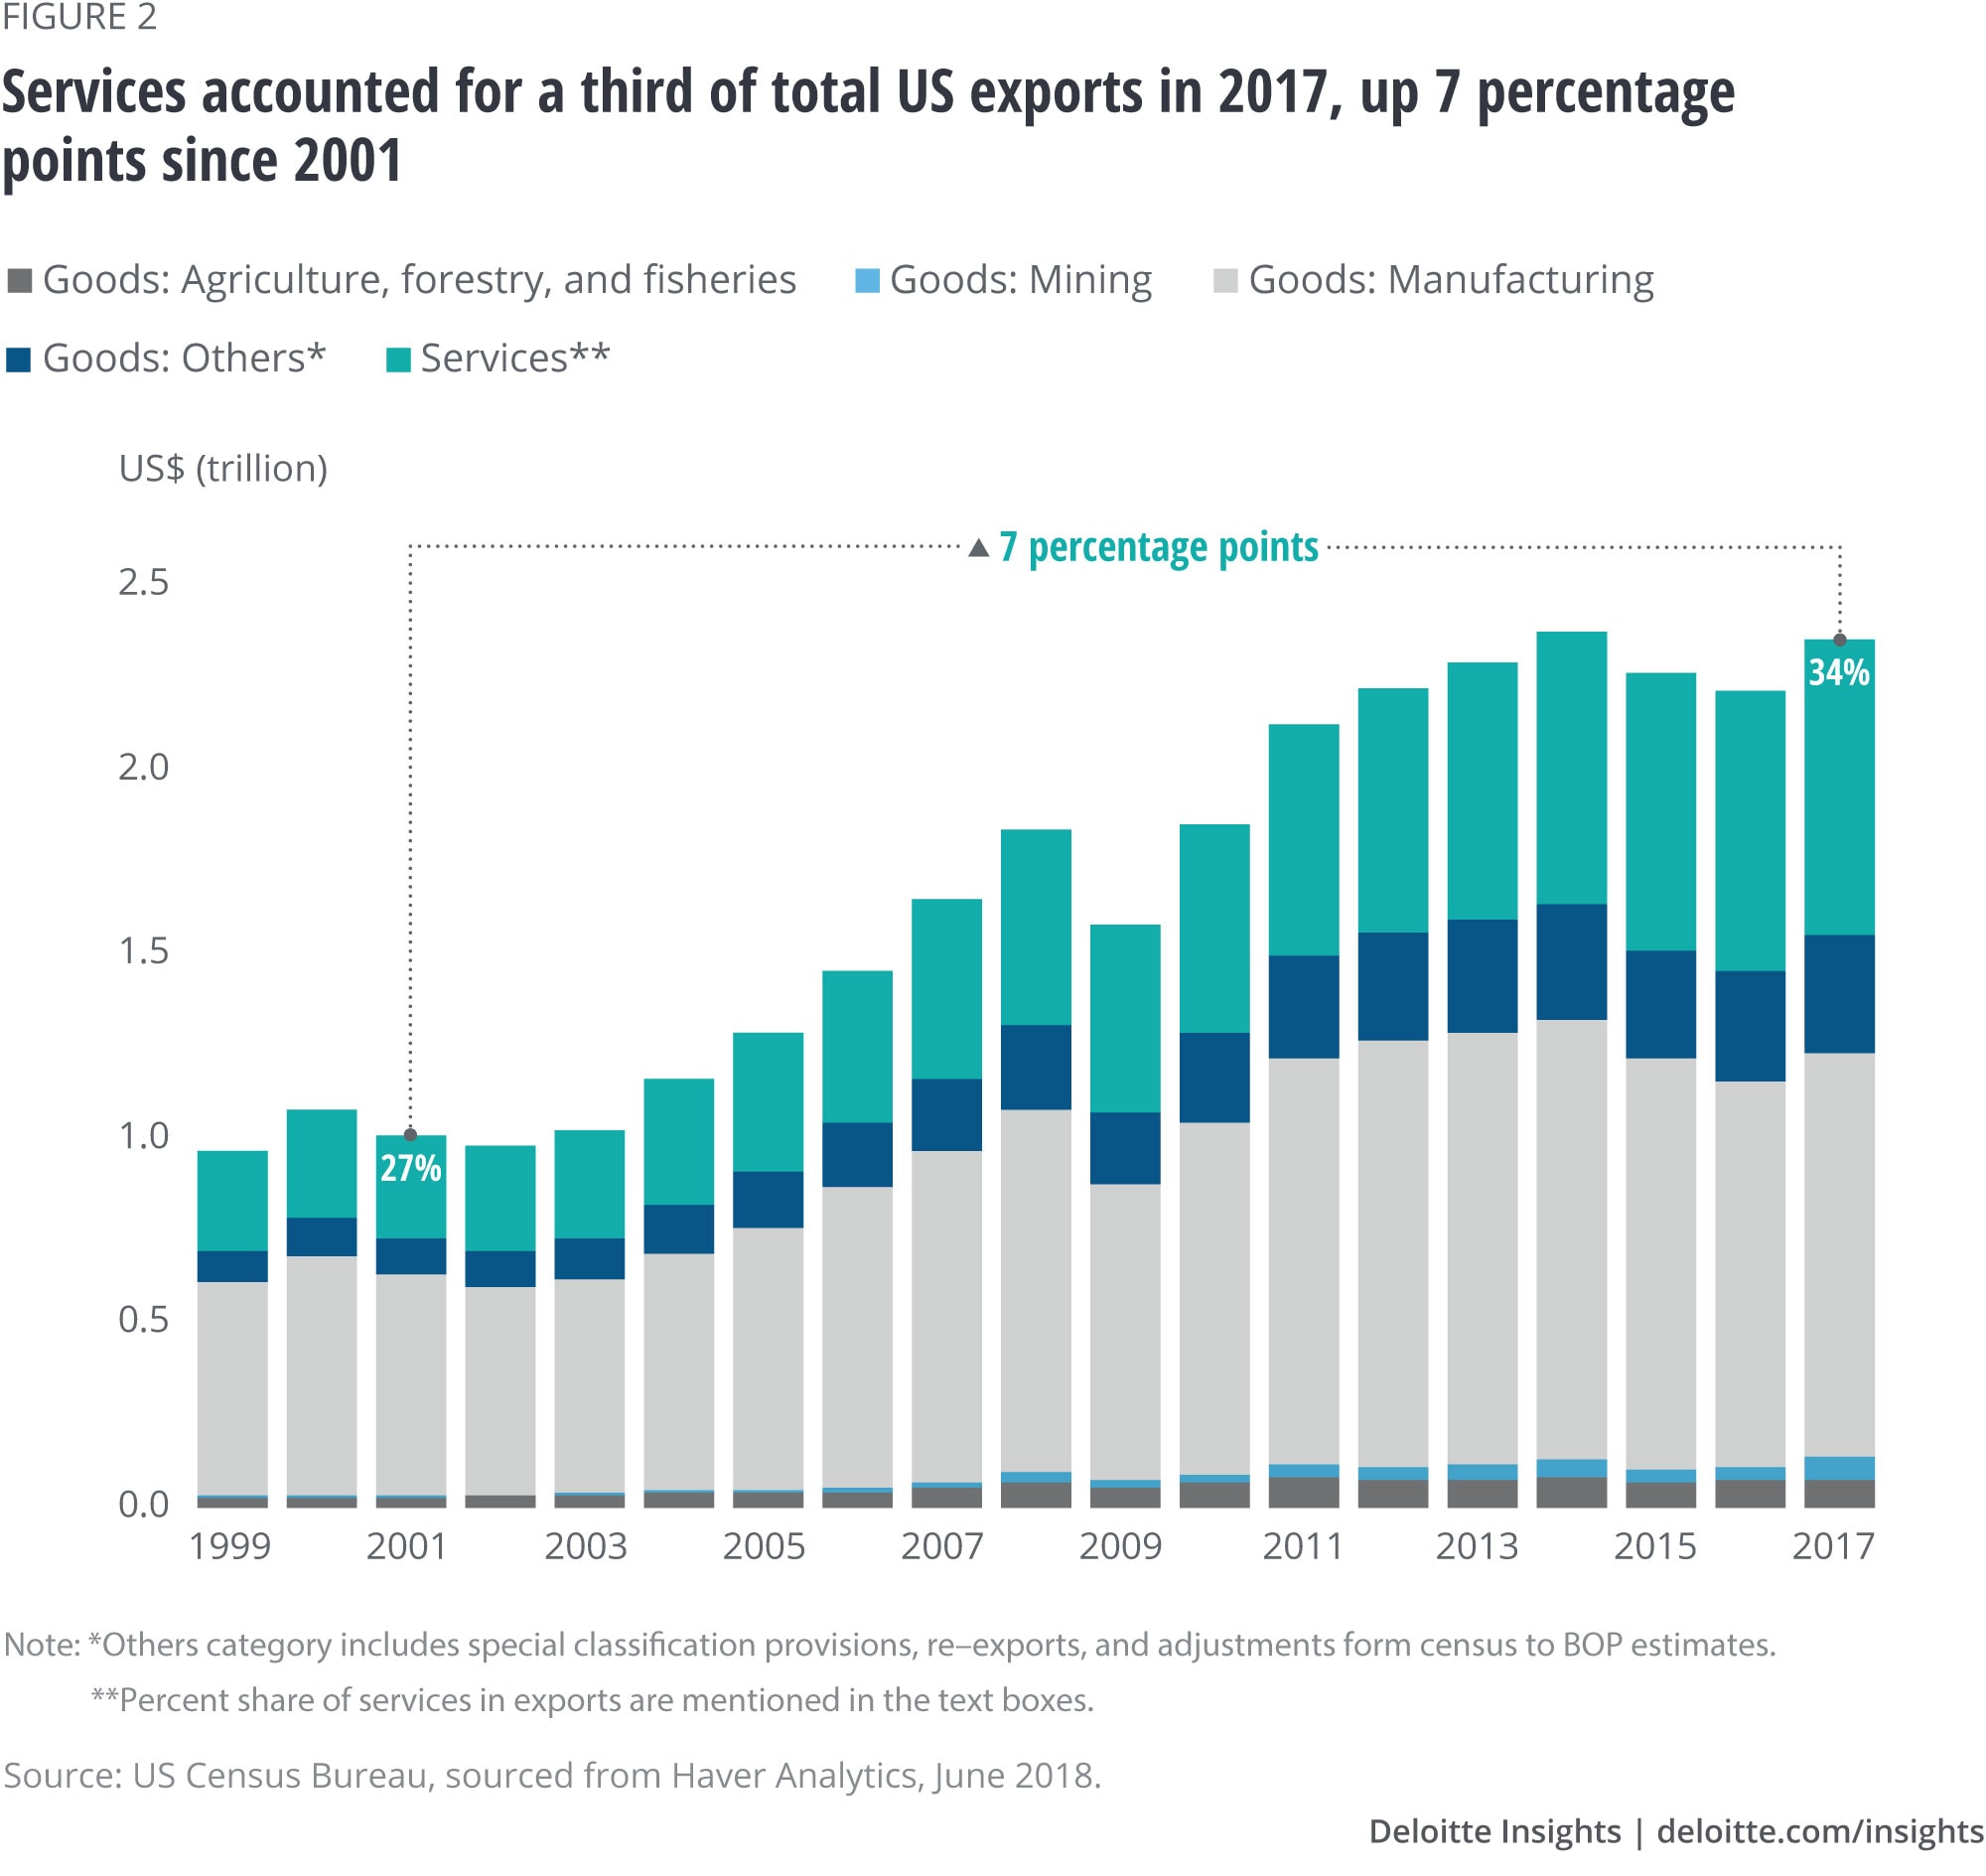 Services accounted for a third of total US exports in 2017, up 7 percentage points since 2001